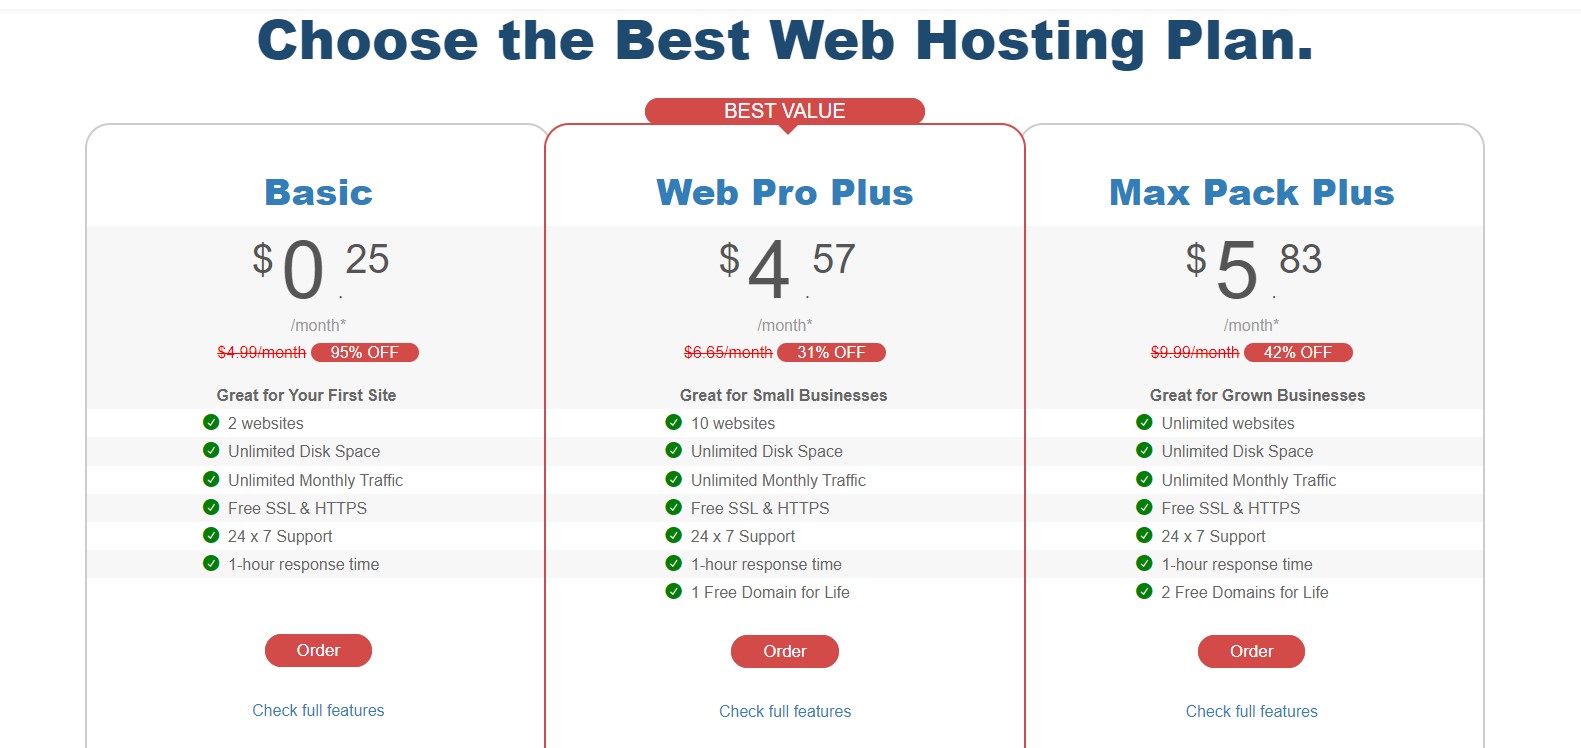 7+ BEST Free WordPress Hosting Services That Really Fast & Secure